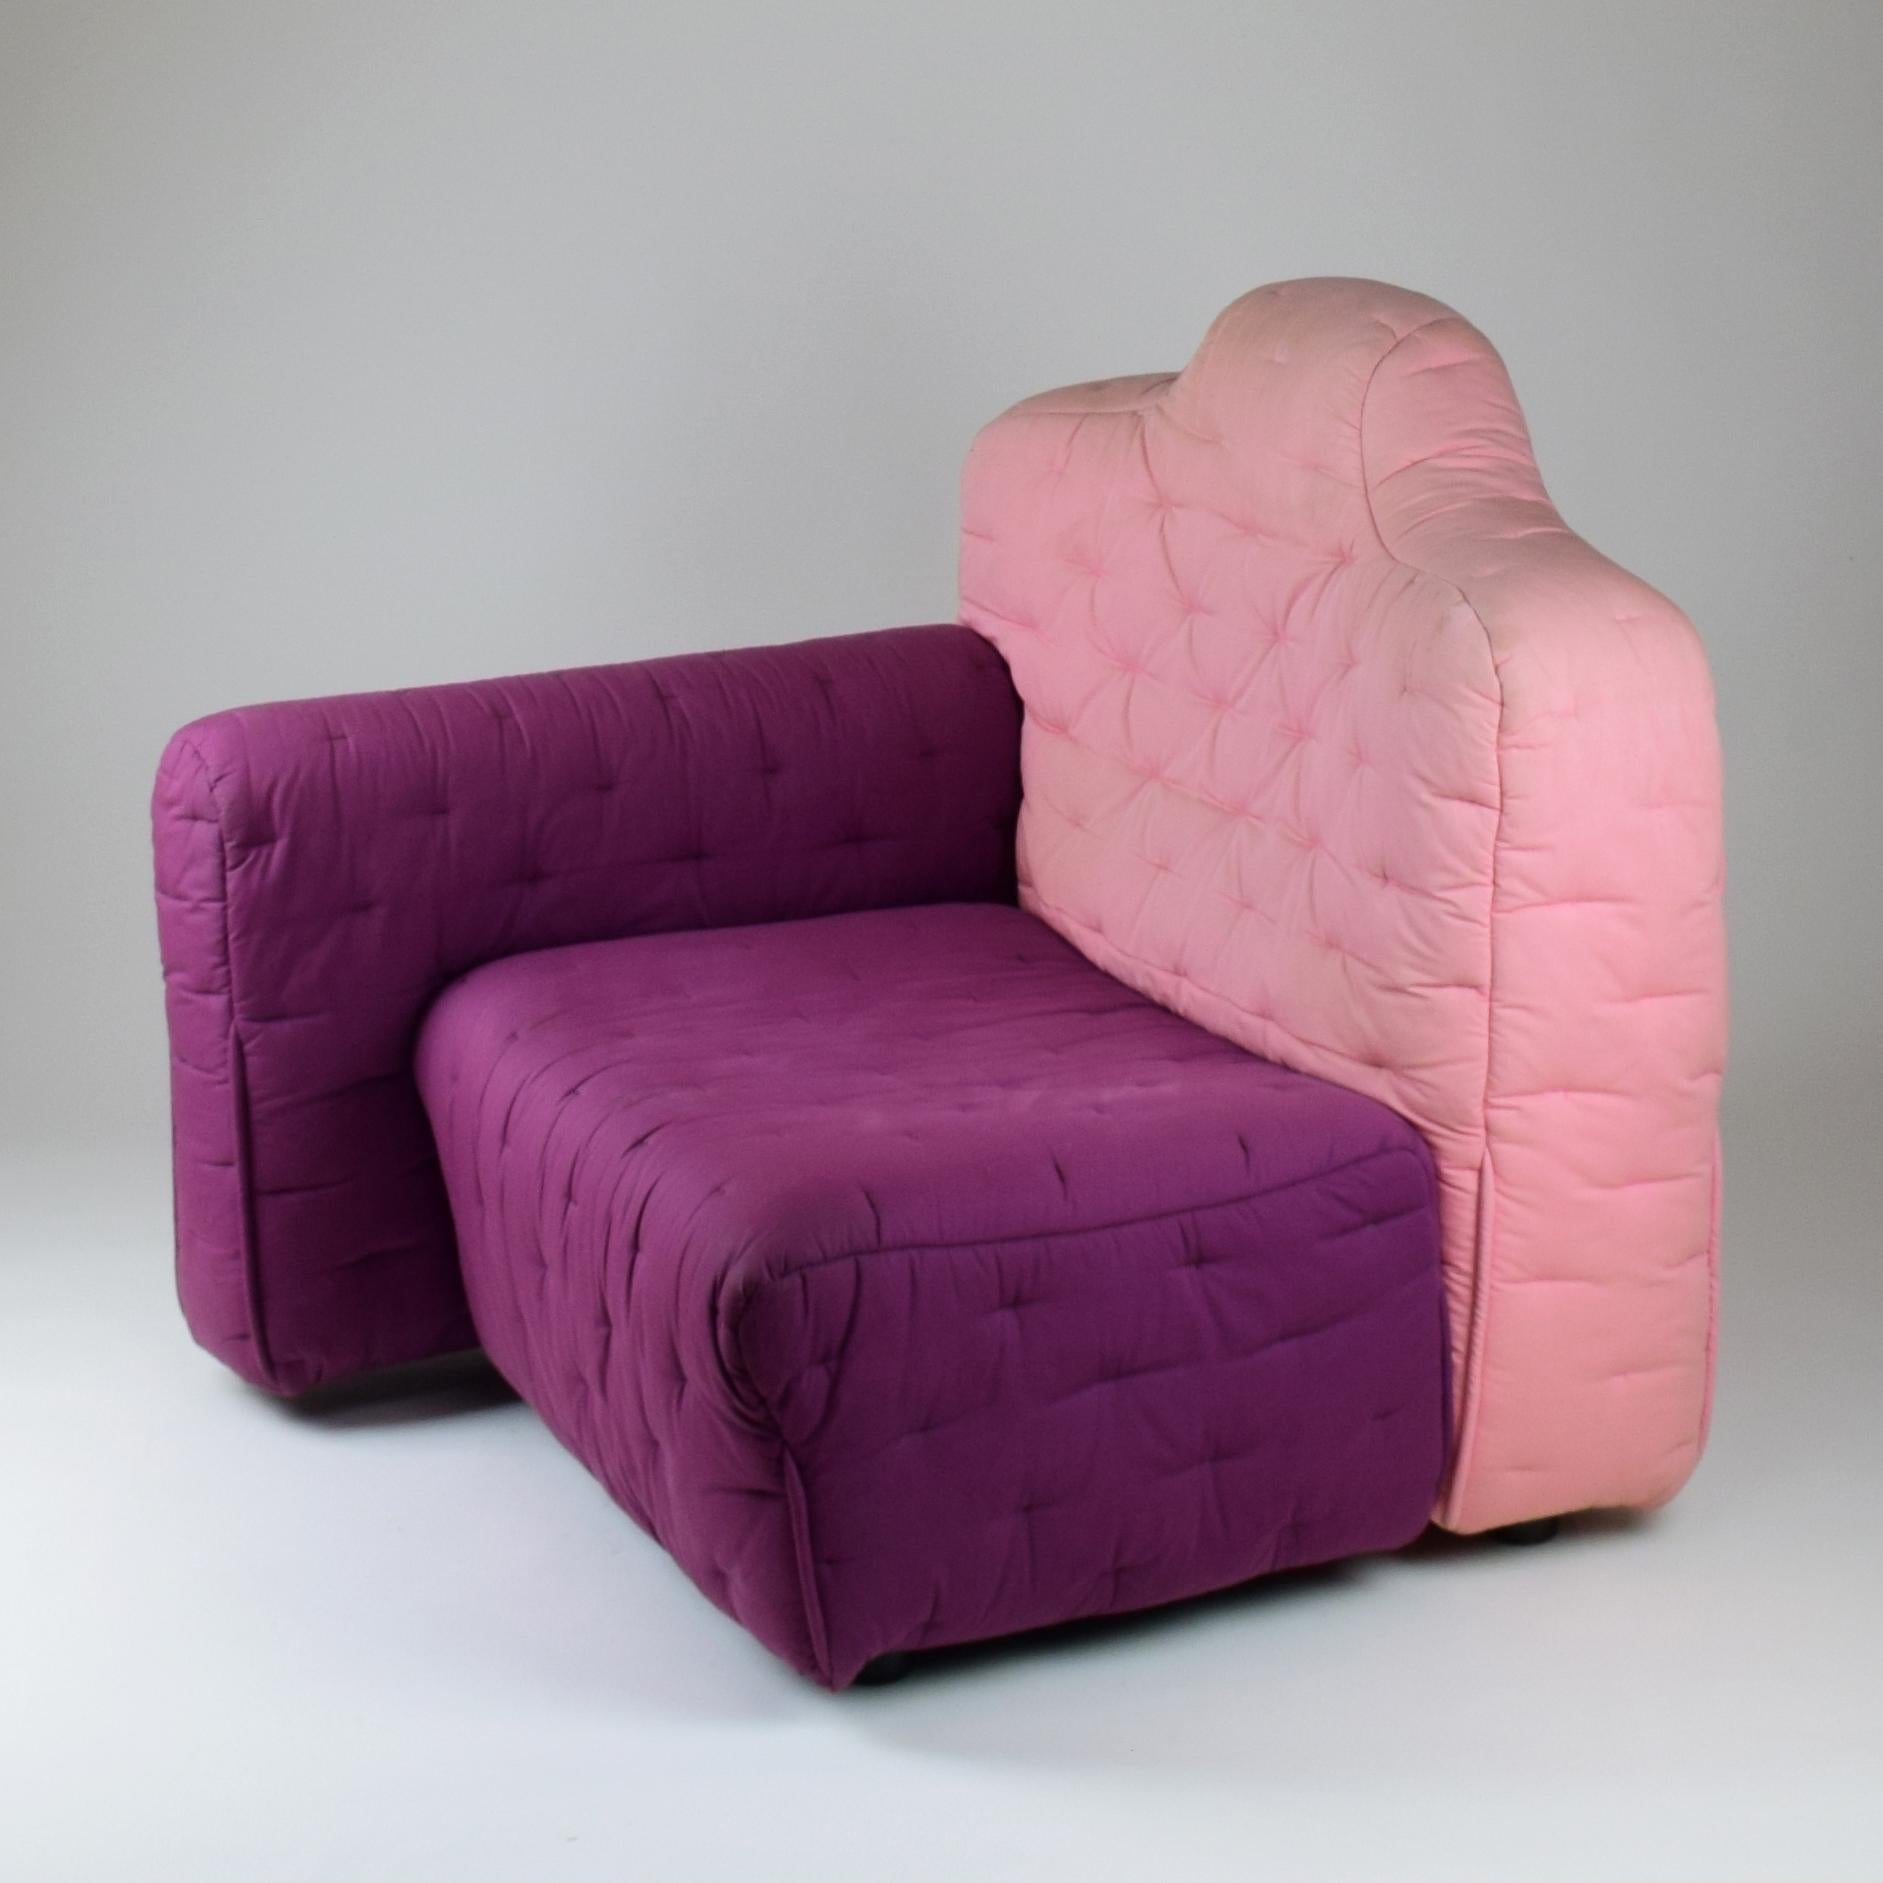 Gaetano Pesce, 'Cannaregio' Armchair, Cassina Italy 1987, Large Pink and Purple For Sale 12